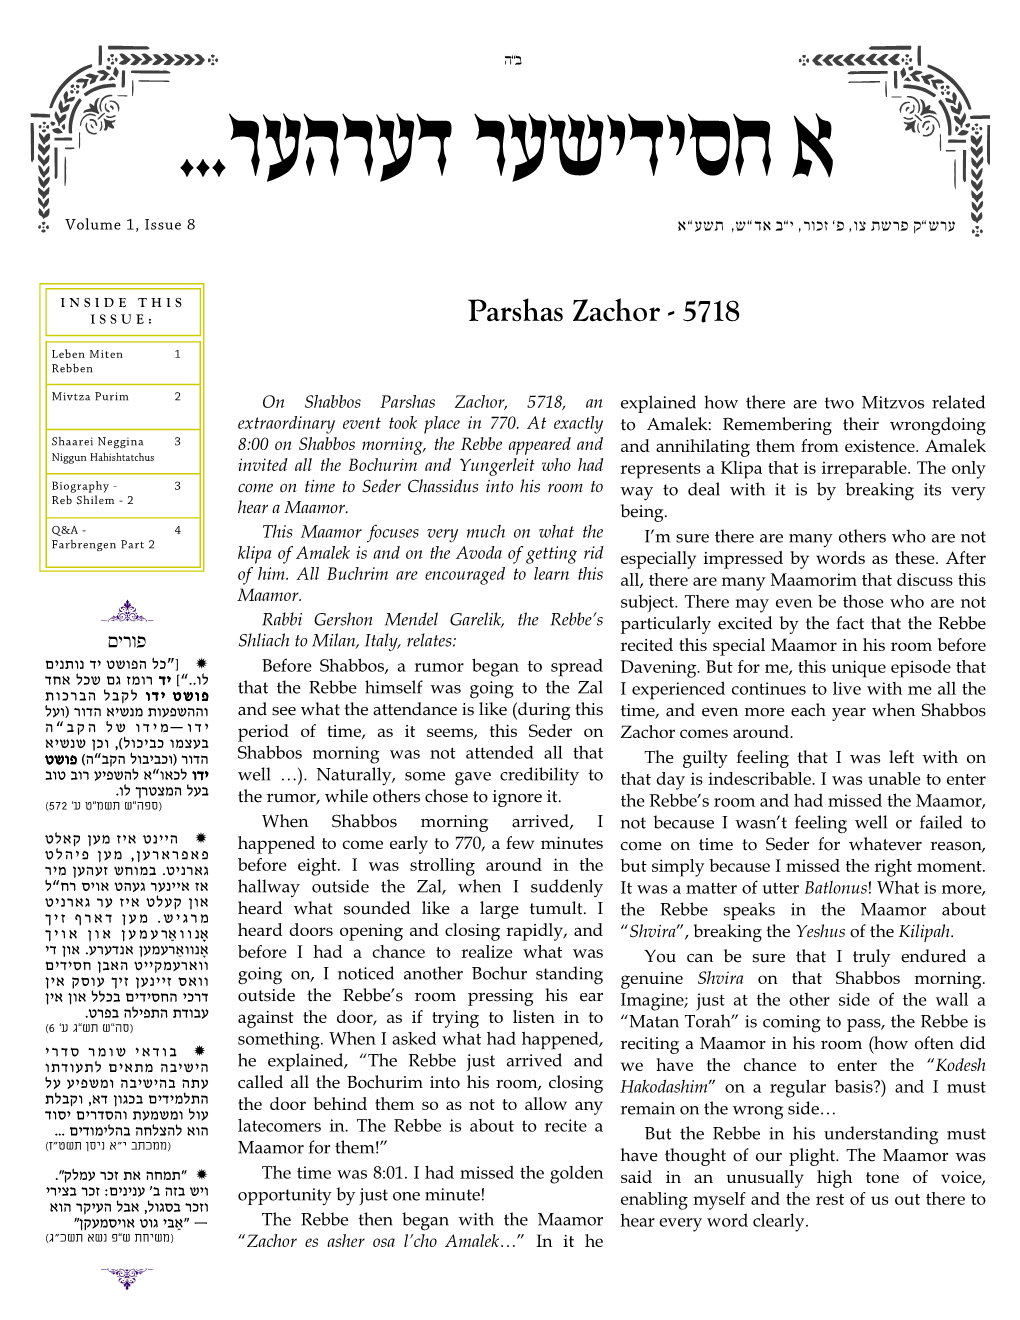 Mivtza Purim 2 on Shabbos Parshas Zachor, 5718, an Explained How There Are Two Mitzvos Related Extraordinary Event Took Place in 770